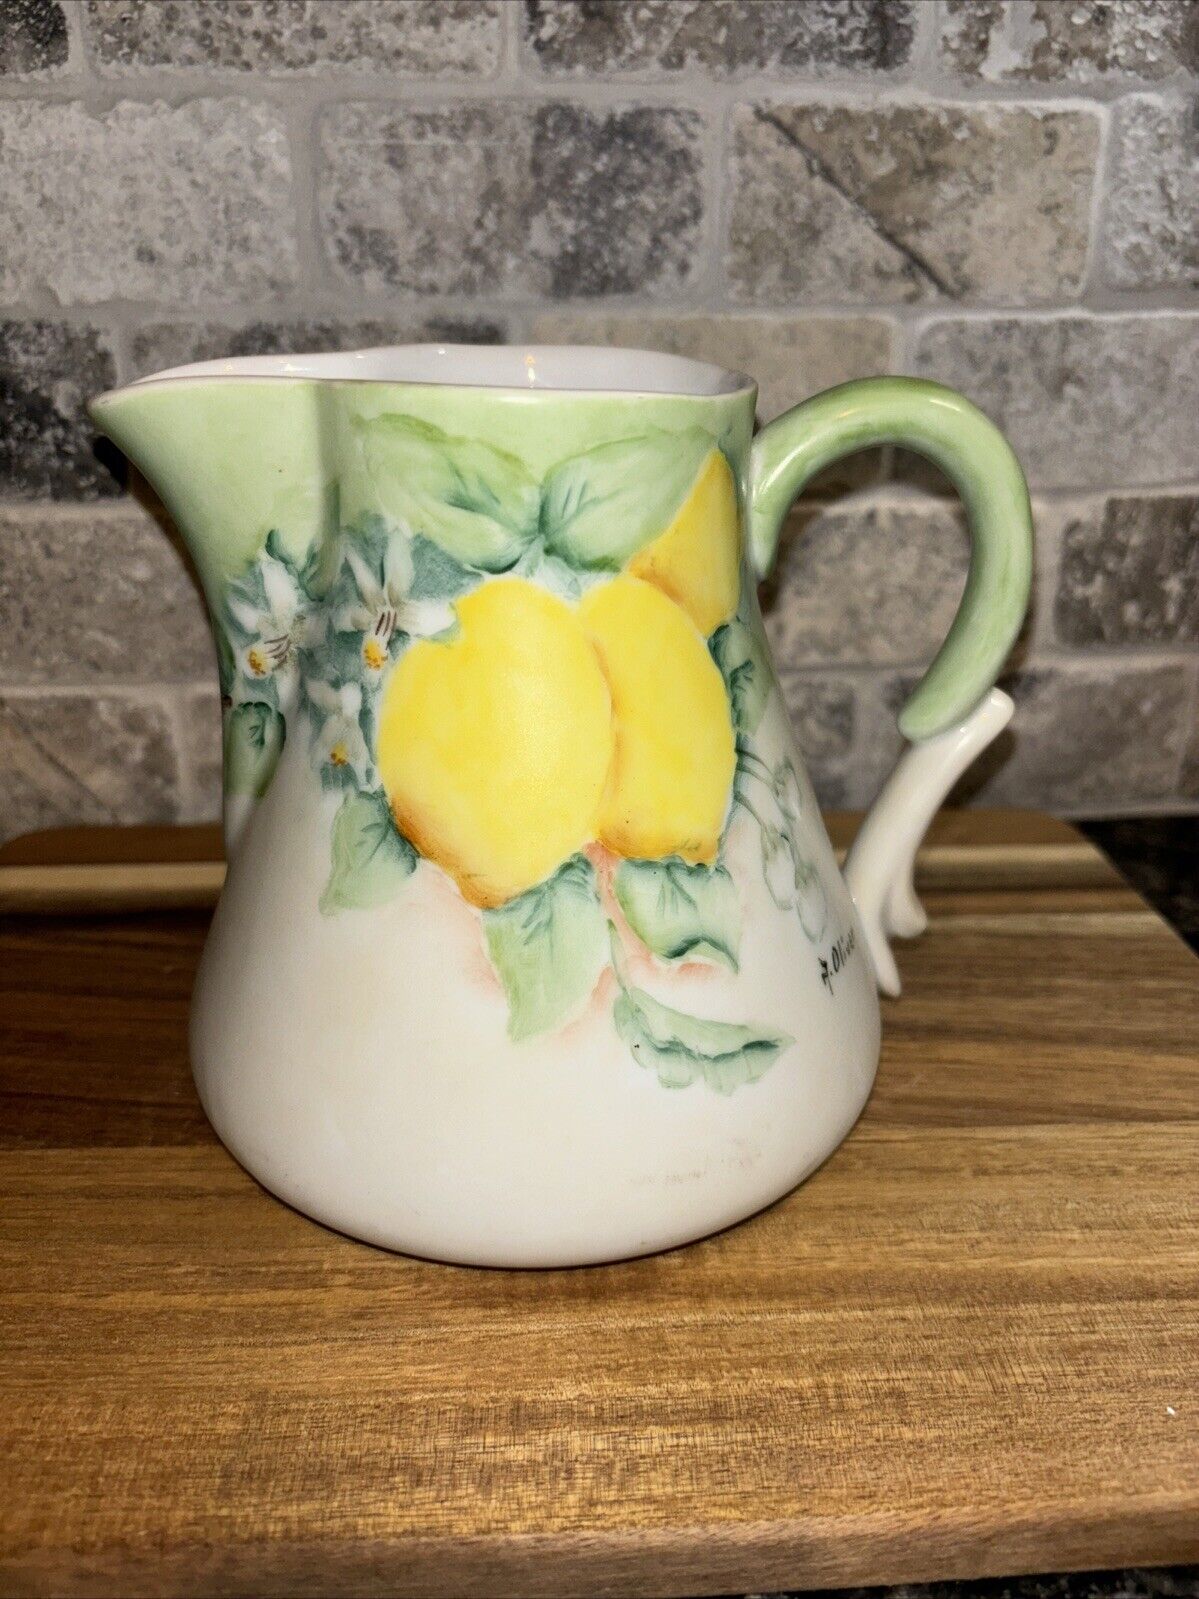 Porcelain pitcher with hand painted lemons and greenery 5 inches tall